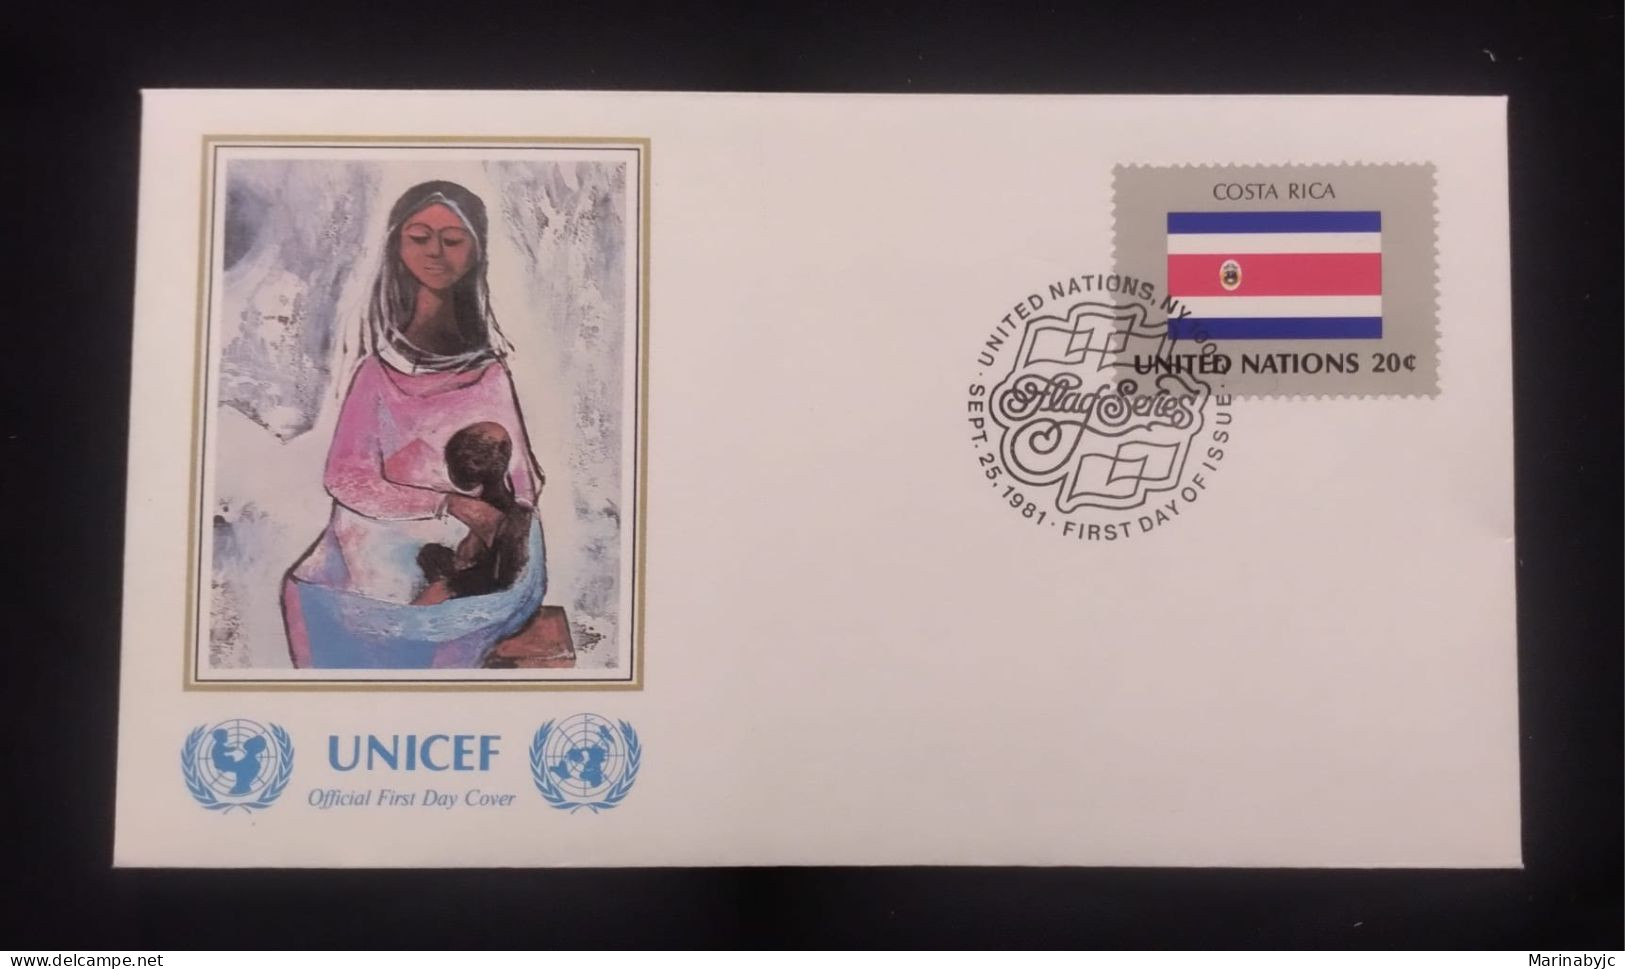 EL)1980 UNITED NATIONS, NATIONAL FLAG OF THE MEMBER COUNTRIES, COSTA RICA, ART - MOTHER AND CHILD PAINTING, UNICEF, FDC - Ungebraucht